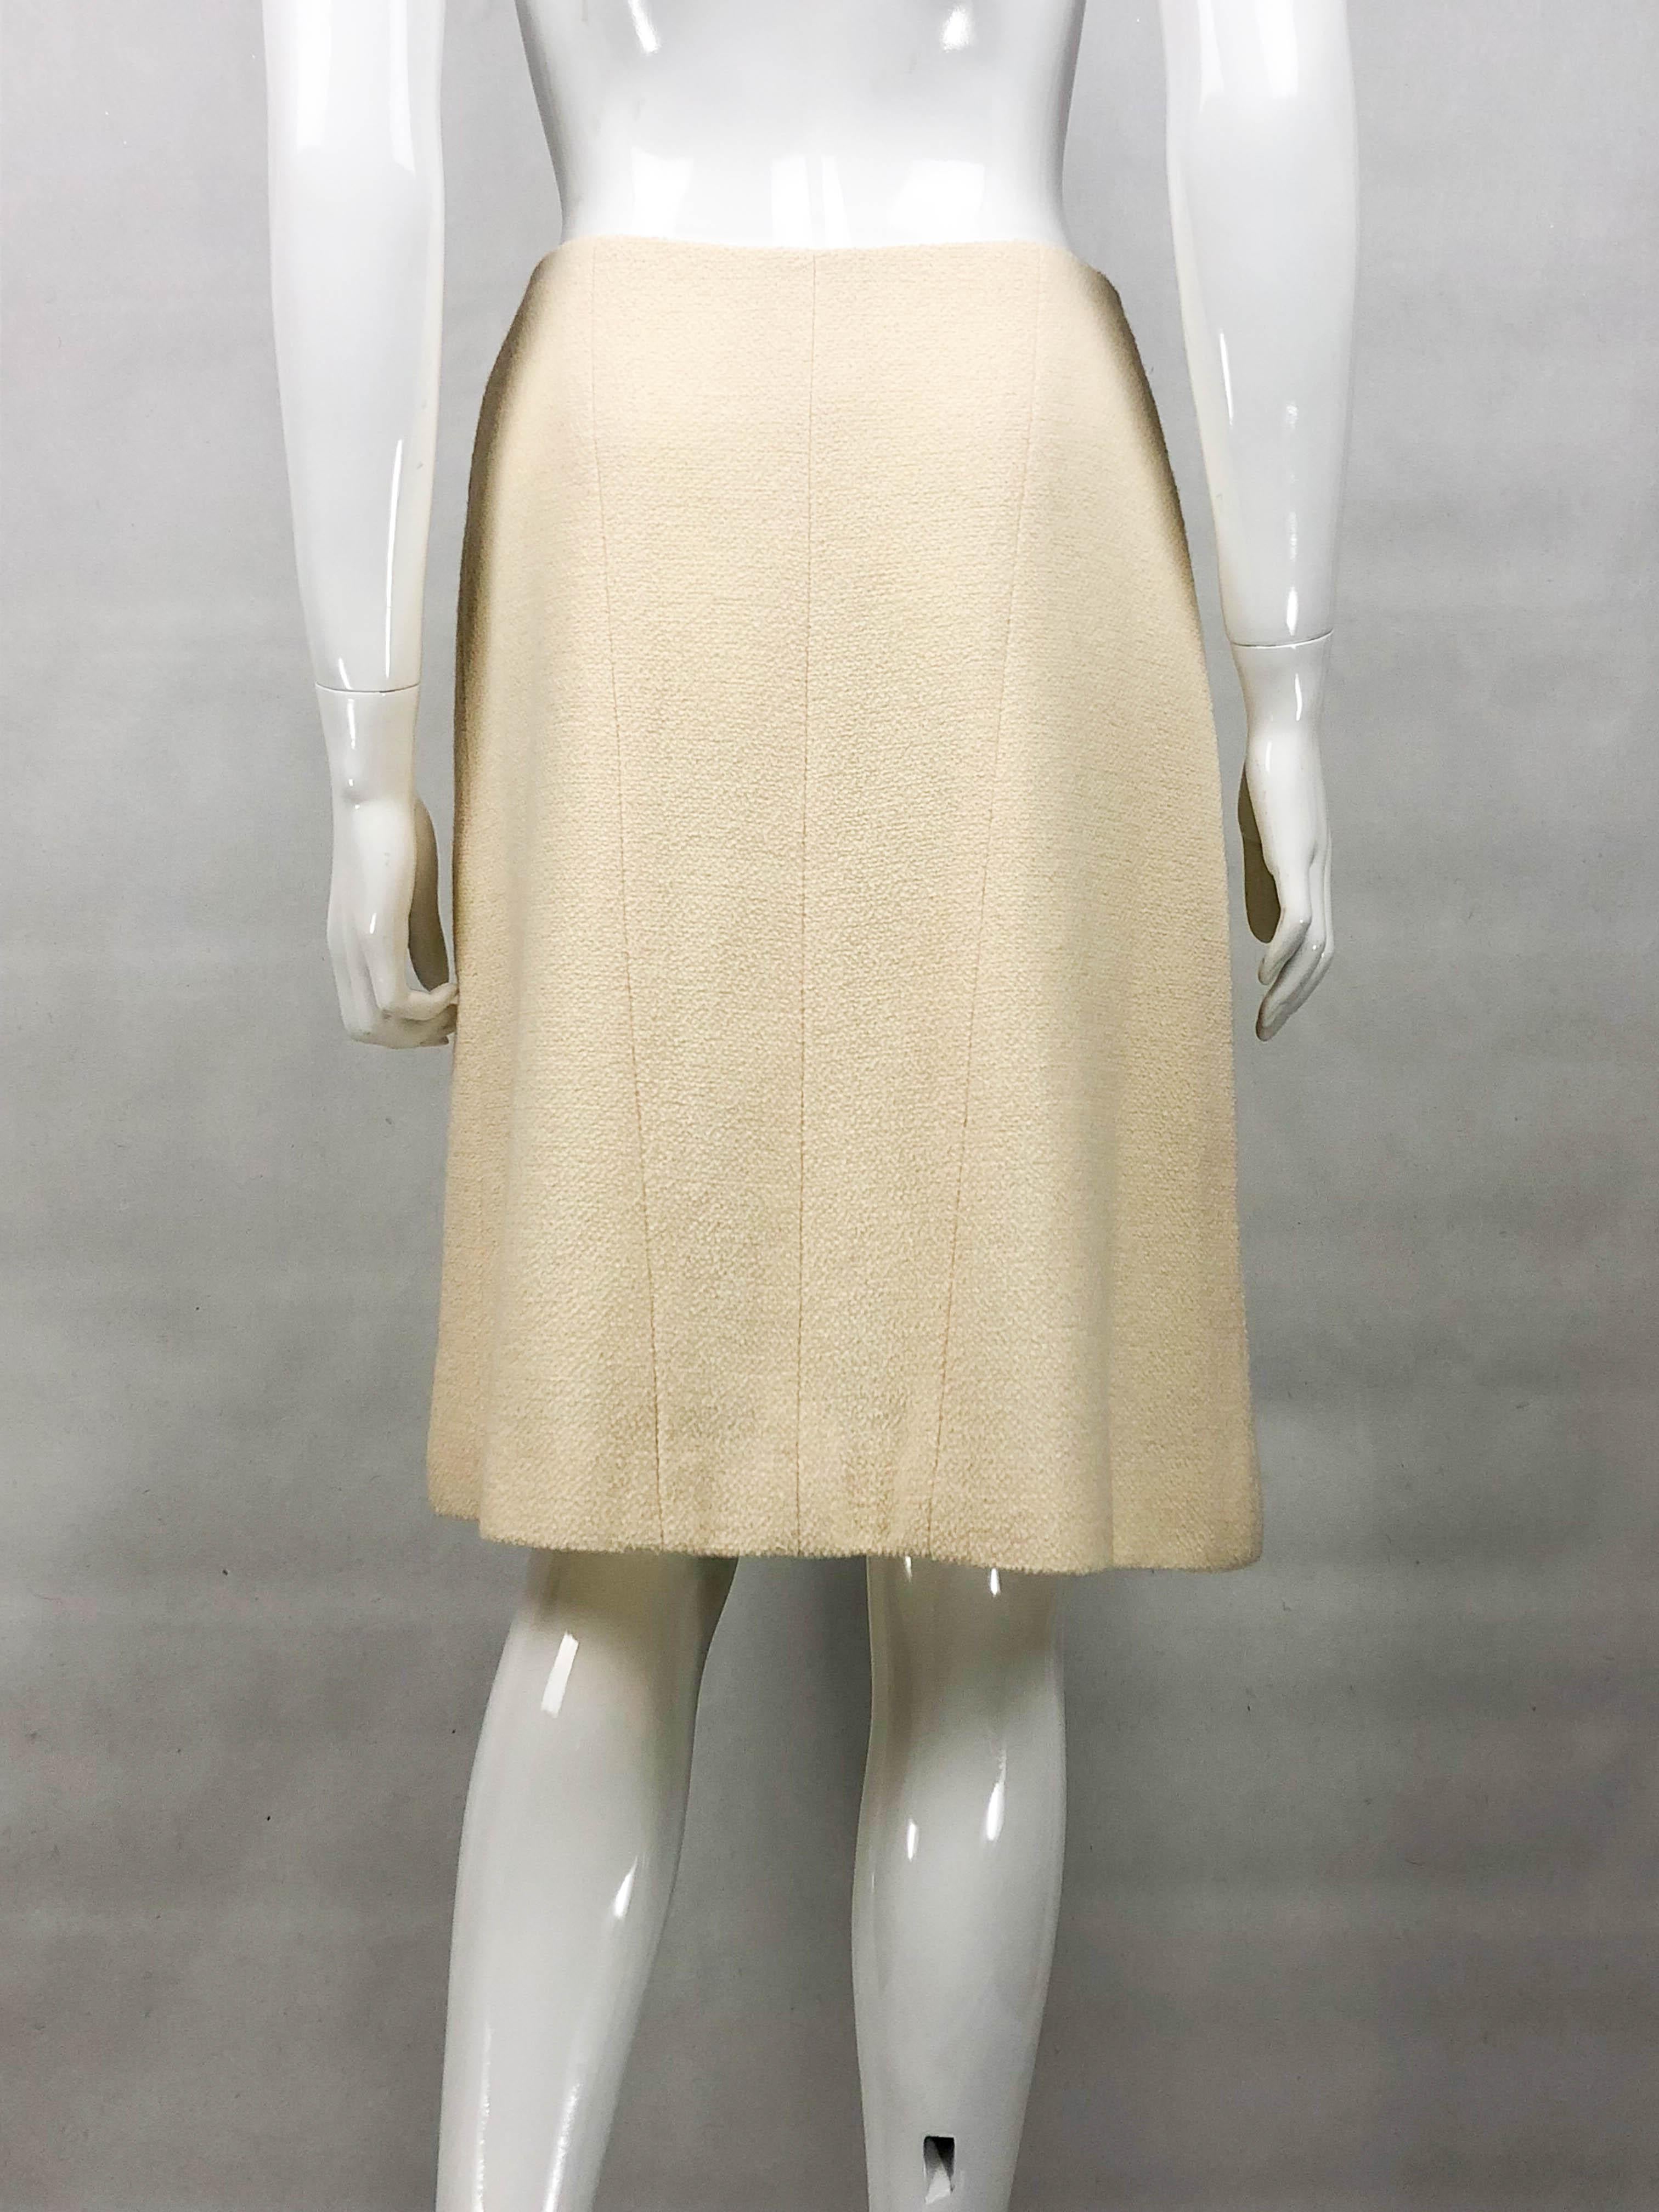 Women's 2003 Chanel Cream Wool A-Line Skirt For Sale